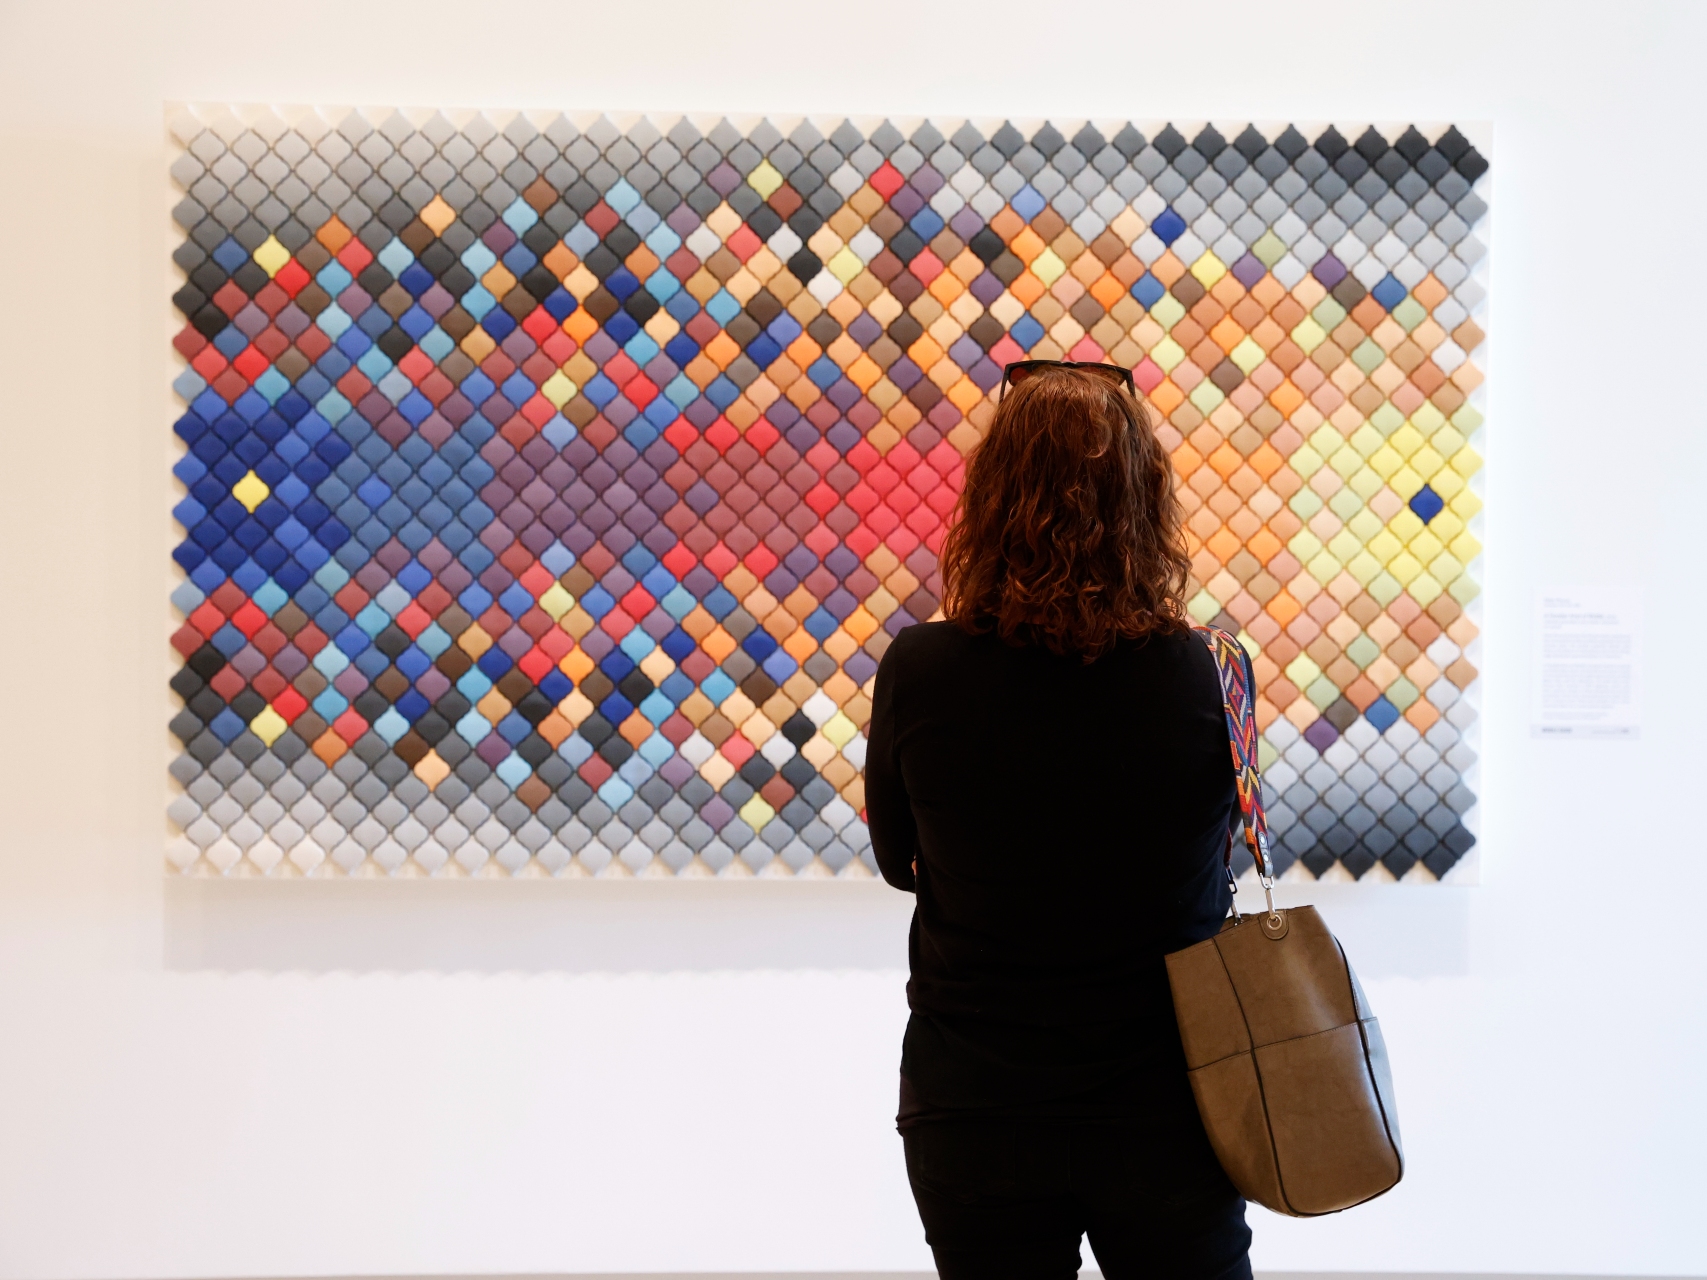 Photo of a woman with her back to the camera observing a brightly-colored tile artwork on the wall of an art gallery.